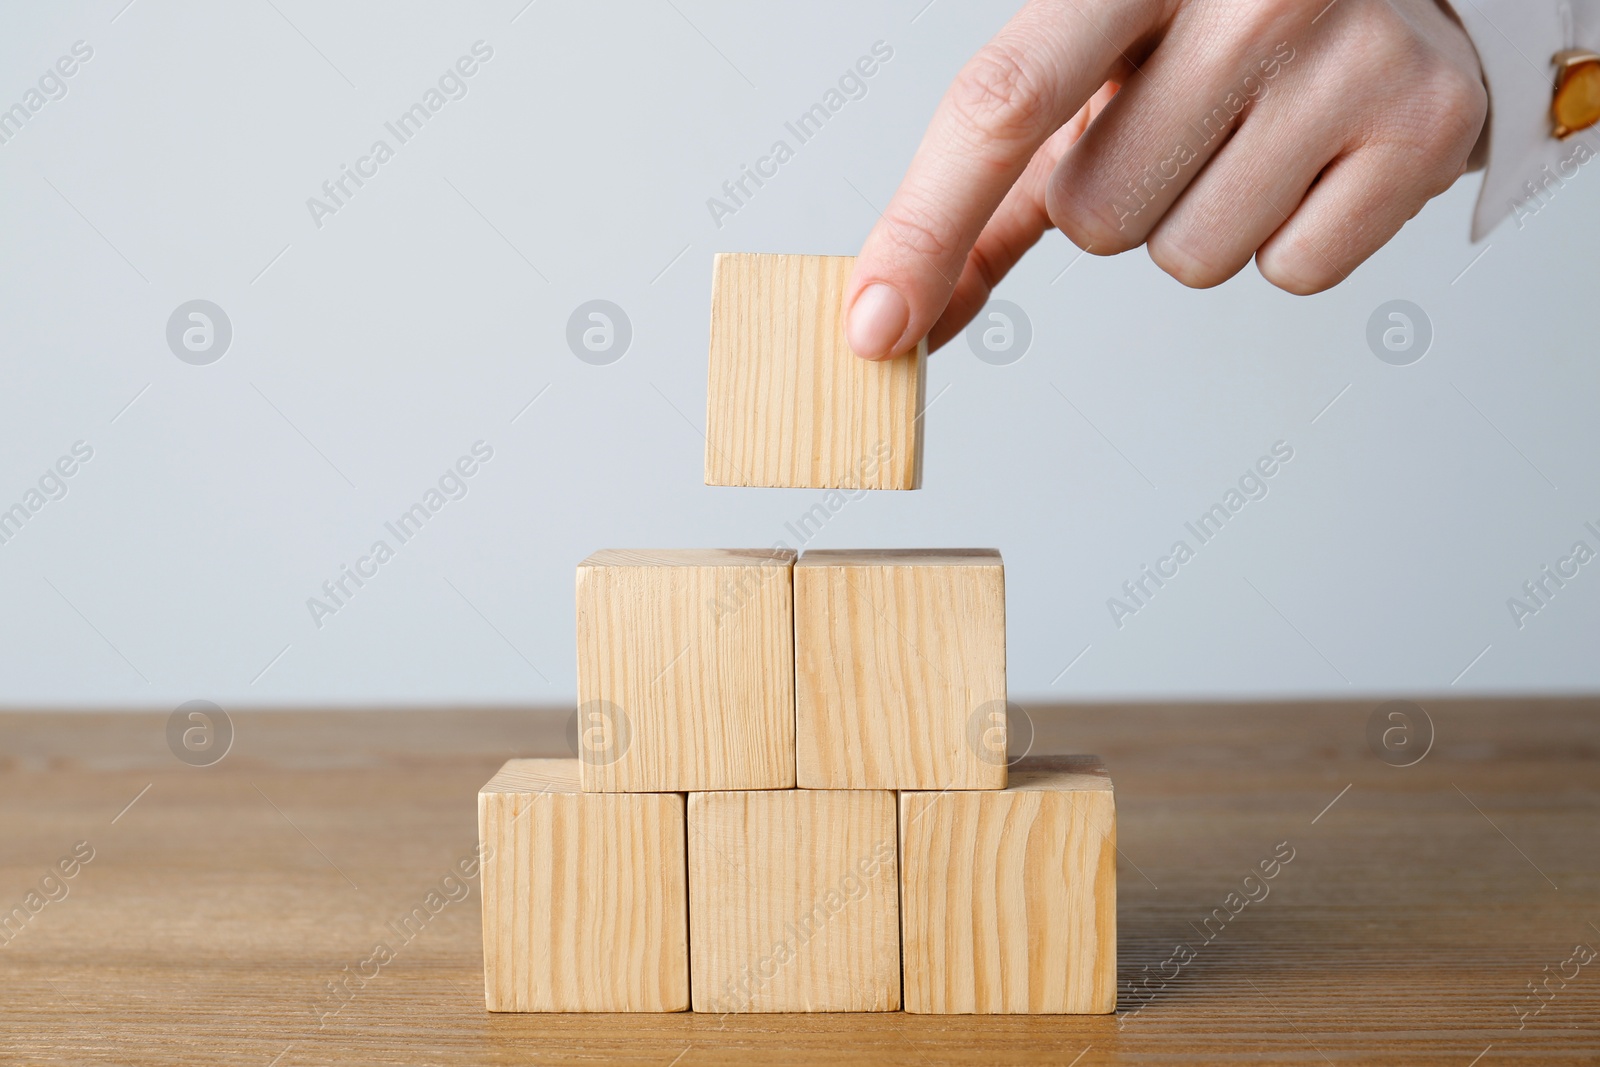 Photo of Woman building pyramid of cubes on wooden table against light background, closeup. Space for text